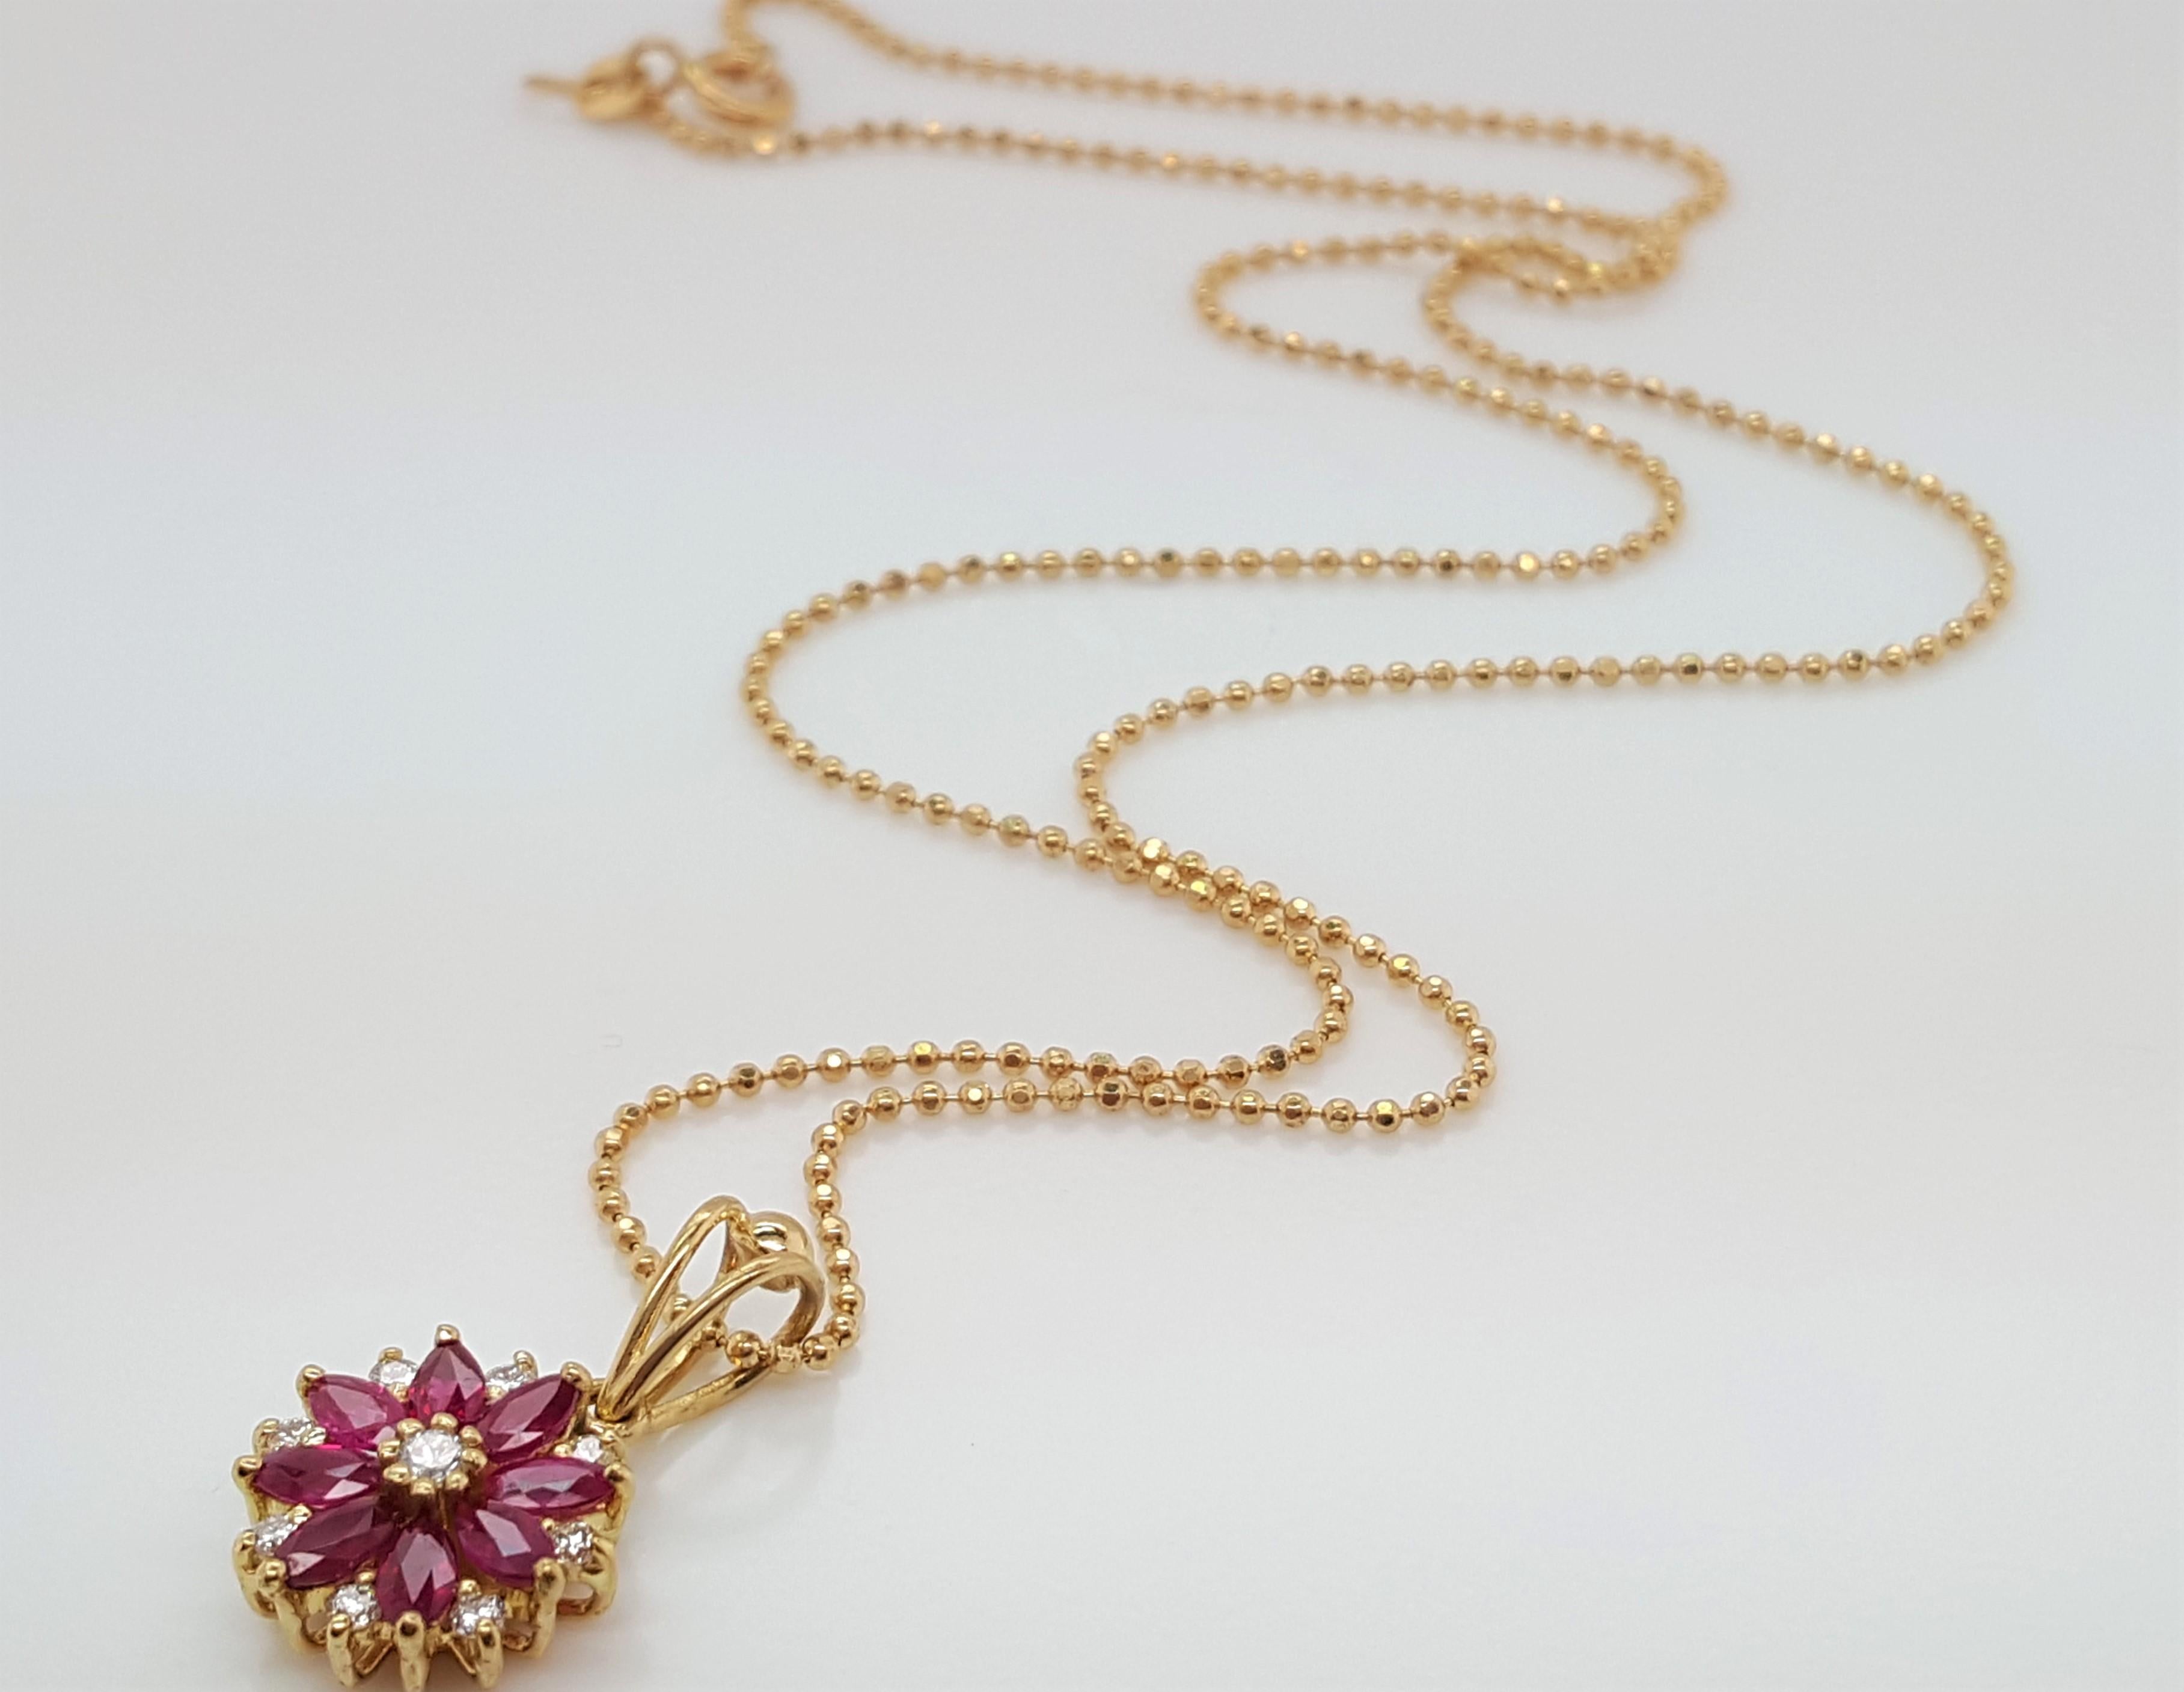 18K Yellow Gold Flower Motif Diamond and Ruby Pendant with Chain.  The delicate pendant depicting a flower features eight bright red marquise shaped rubies weighing approximately  0.40 carats total weight, set into prongs, enhanced by full cut round